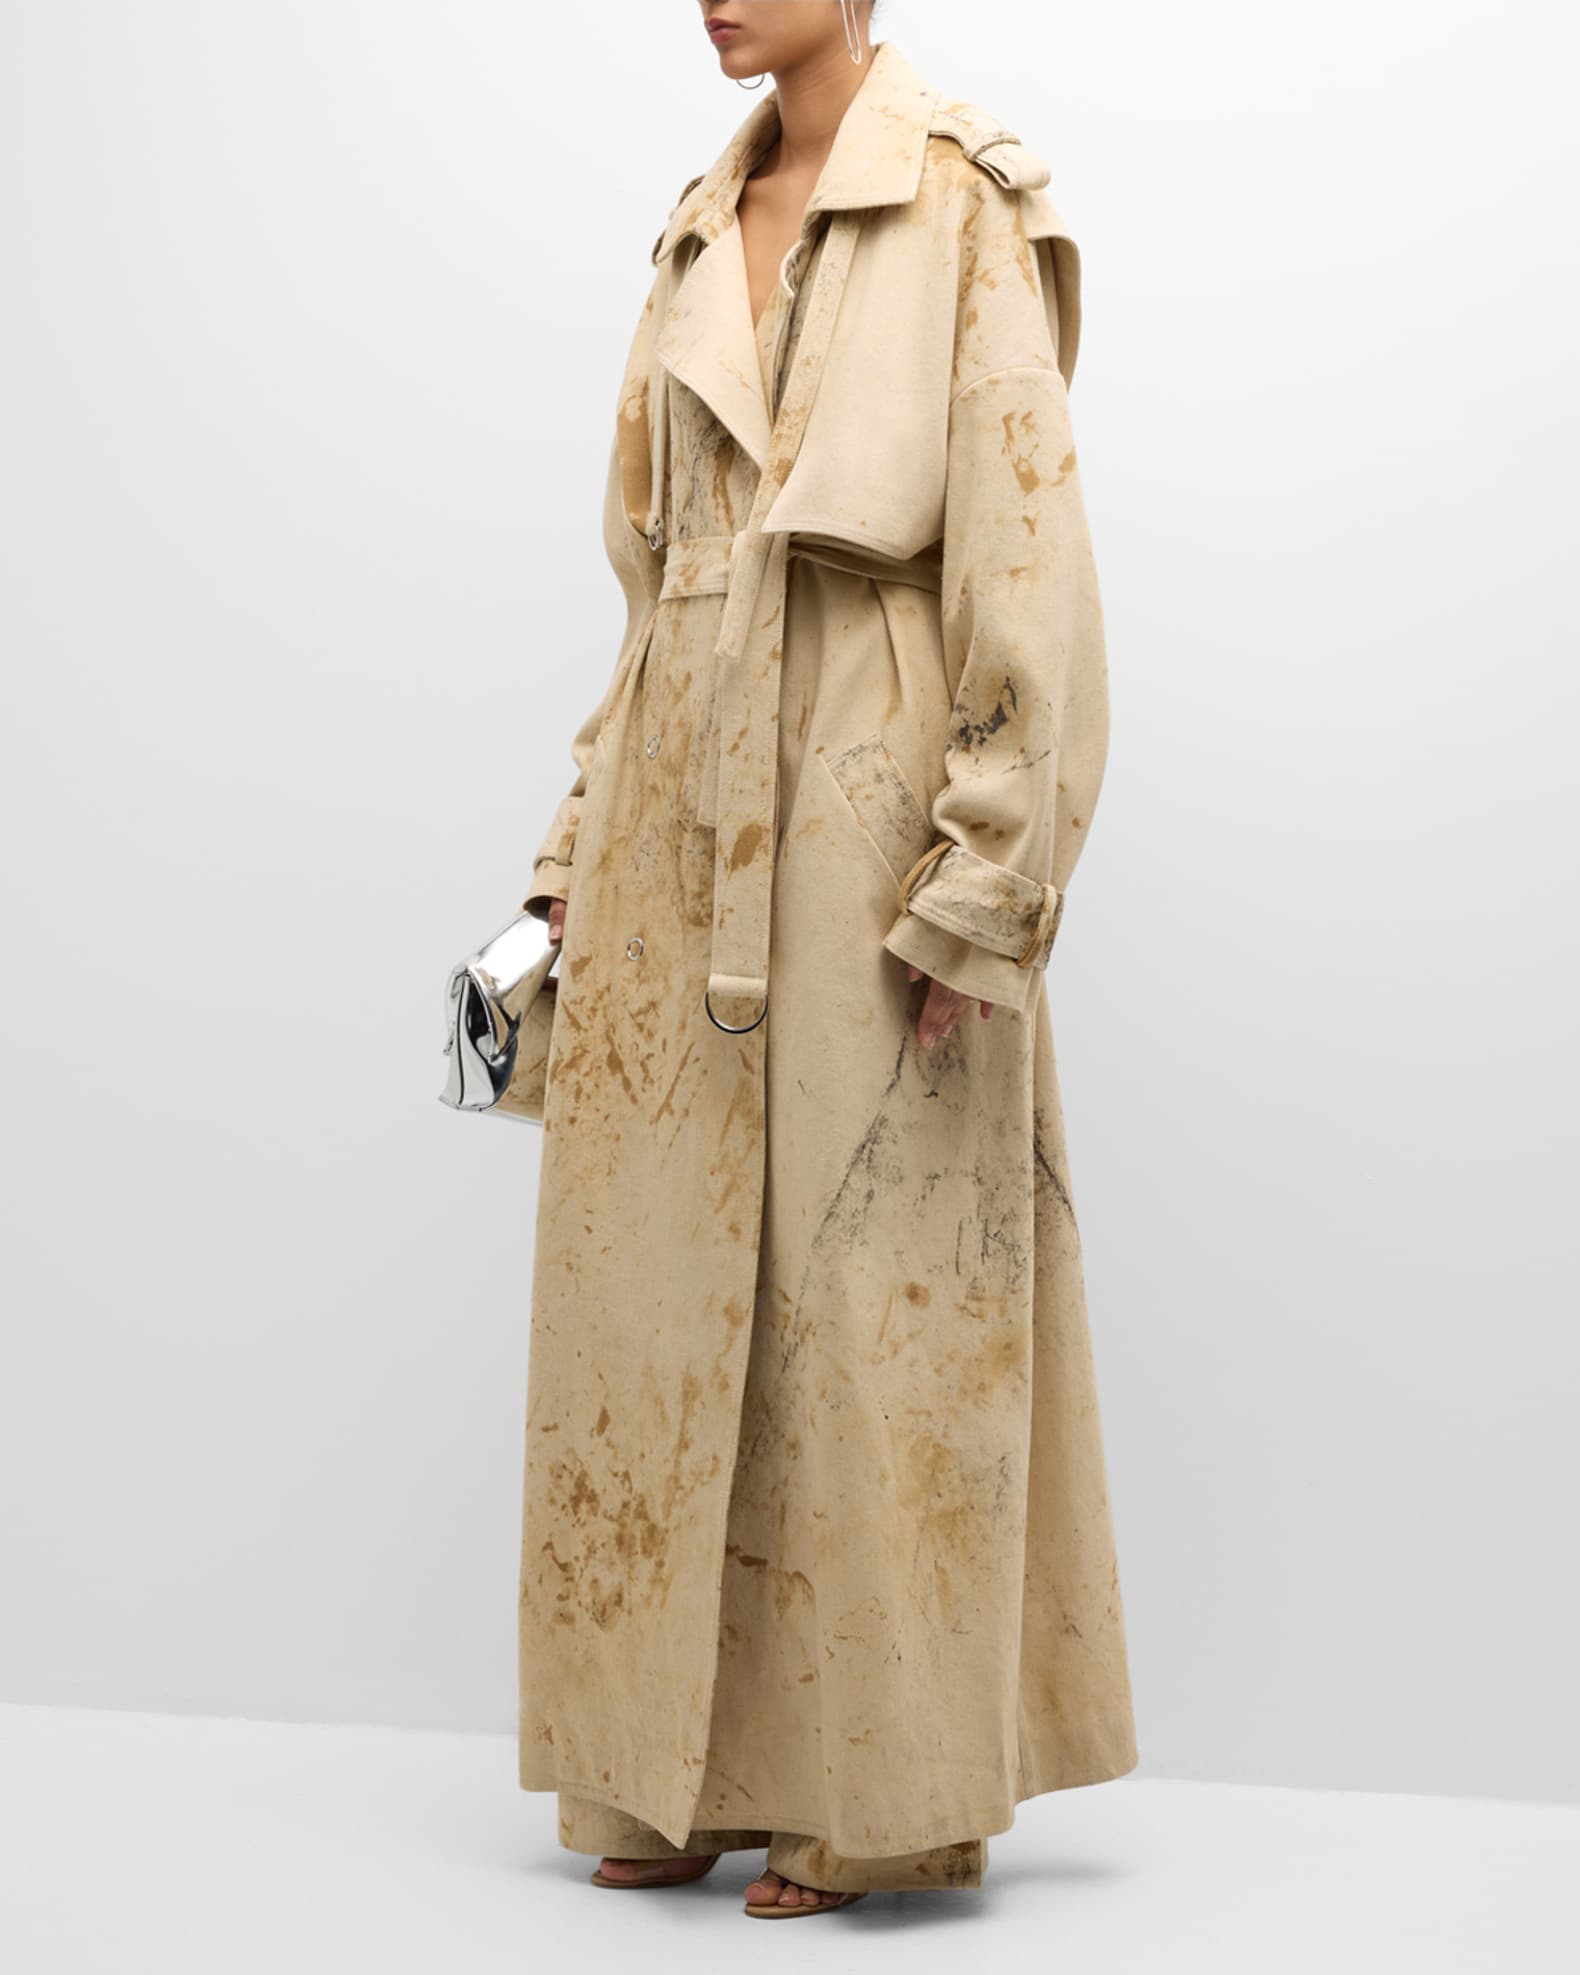 LAPOINTE Splatter Denim Double-Breasted Trench Coat | Neiman Marcus